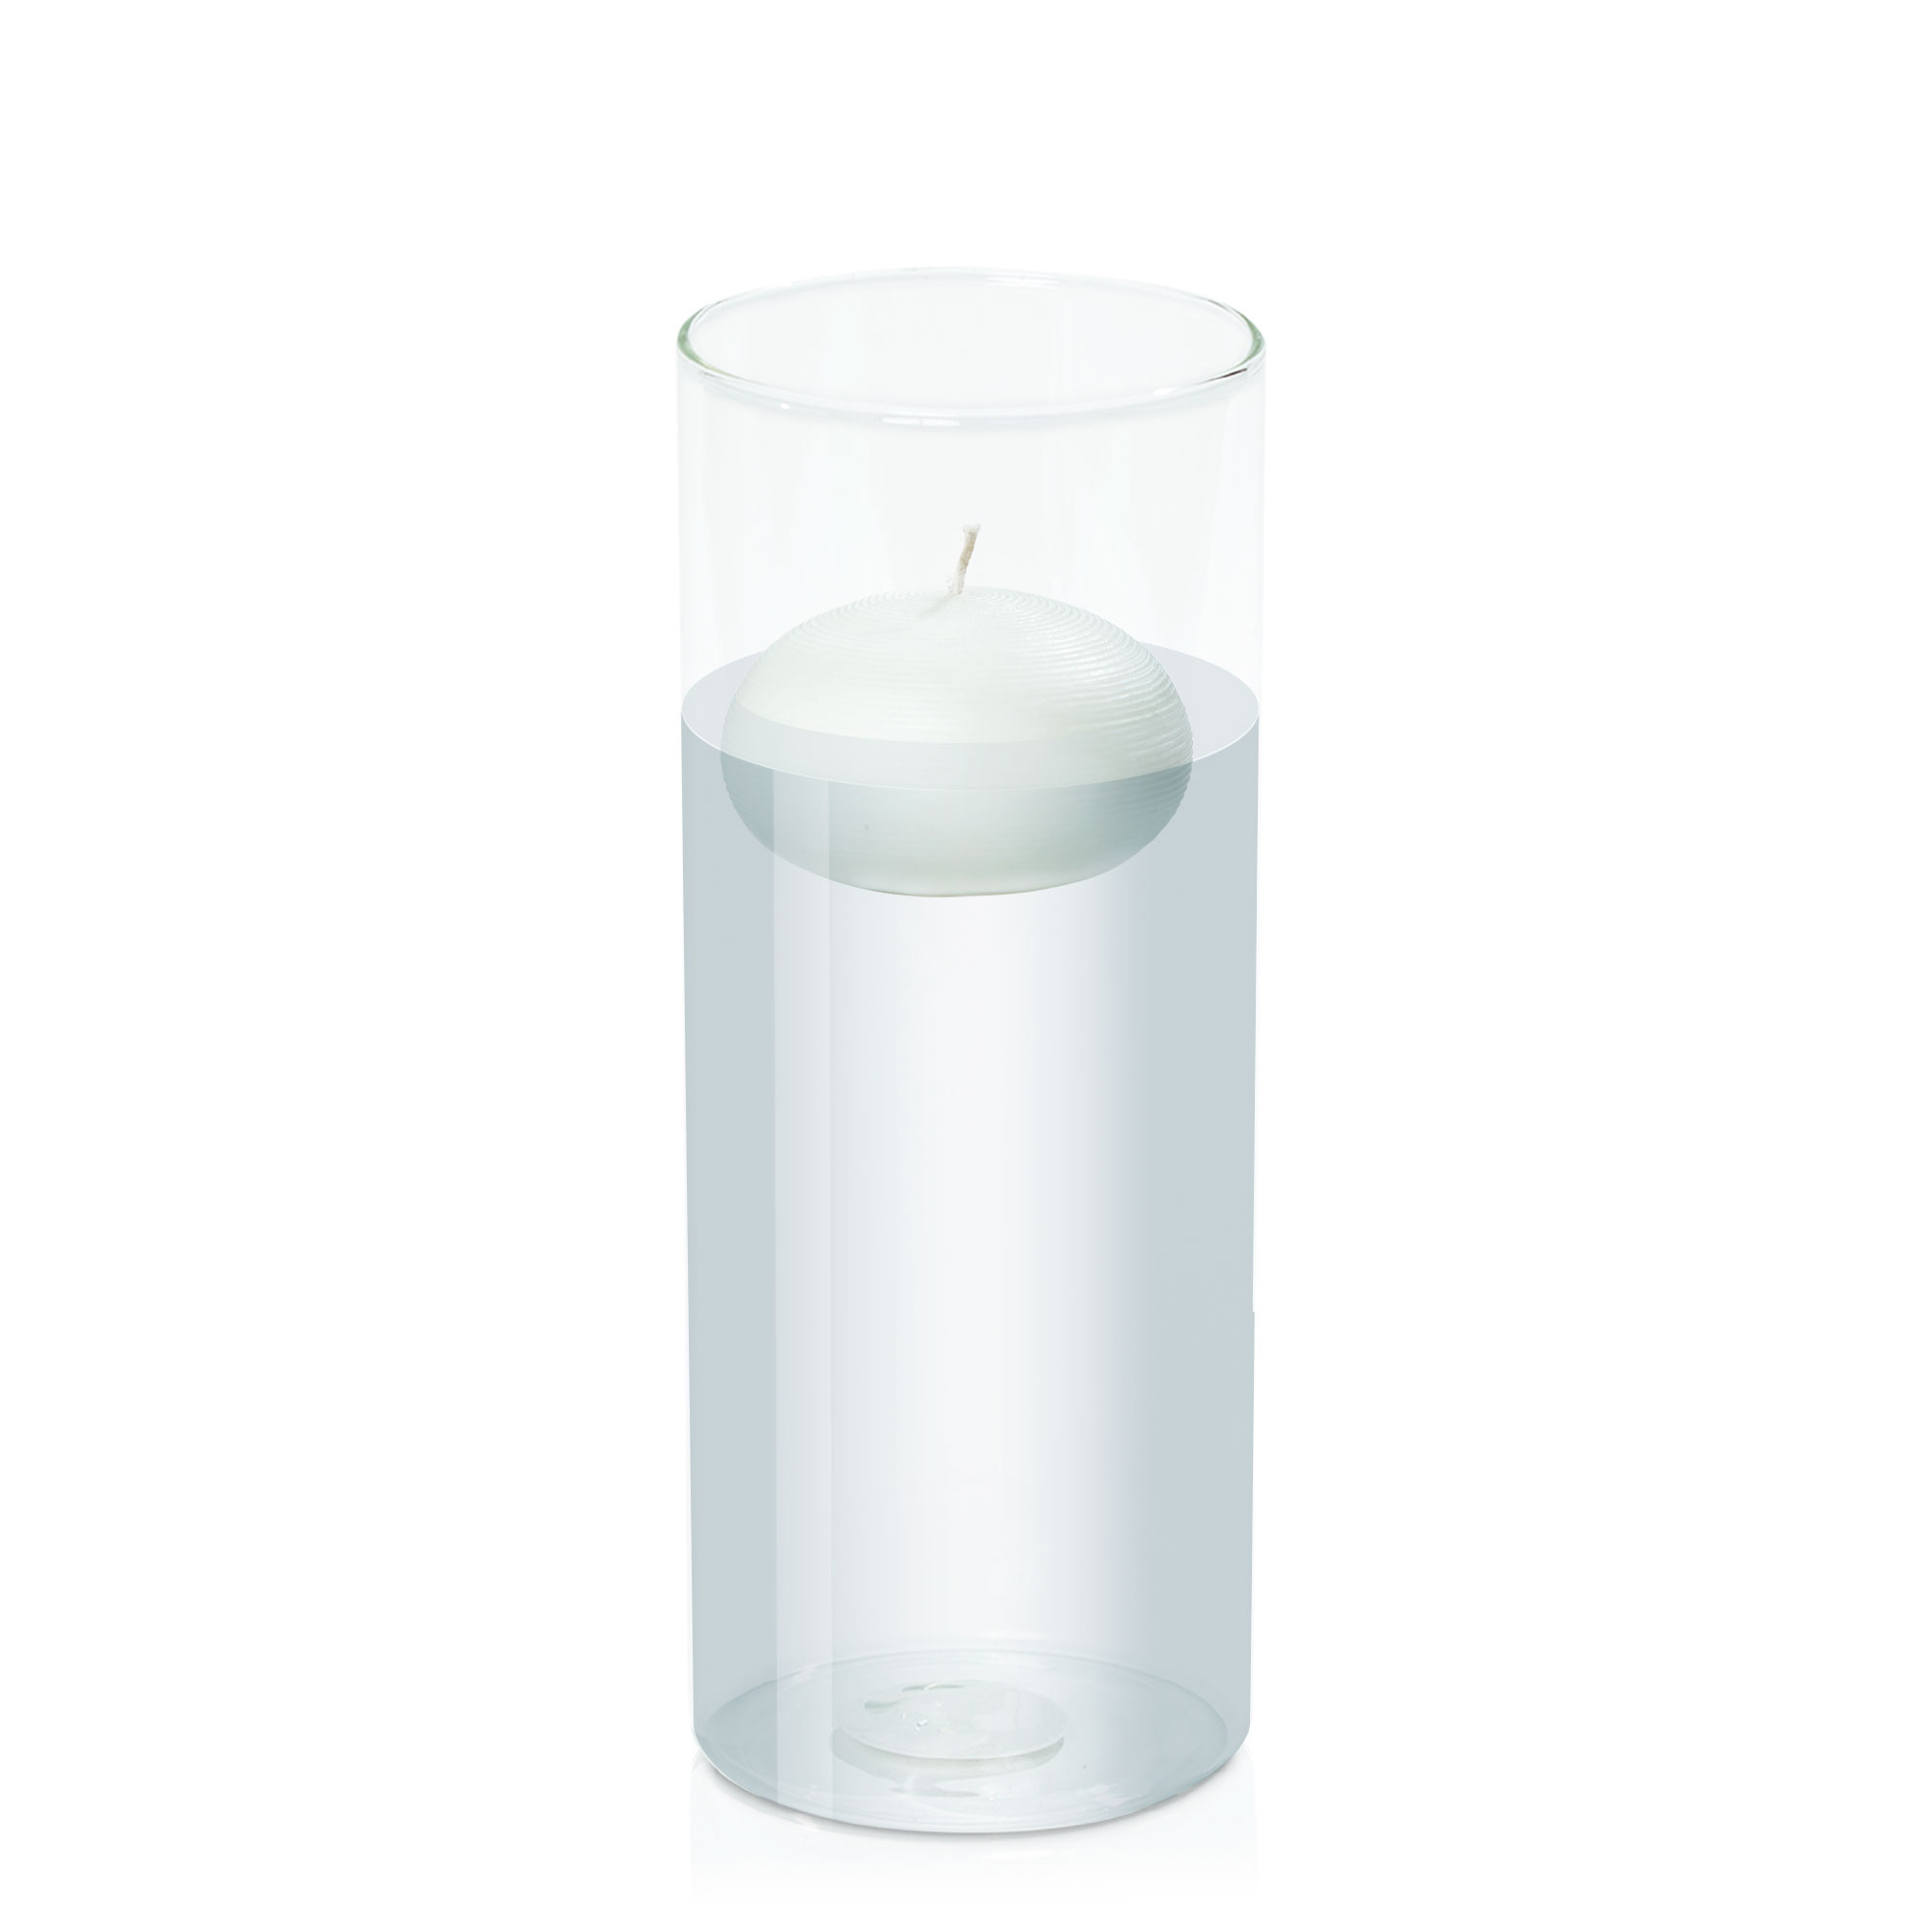 7.5cm Floating Candle in 10cm x 25cm Glass